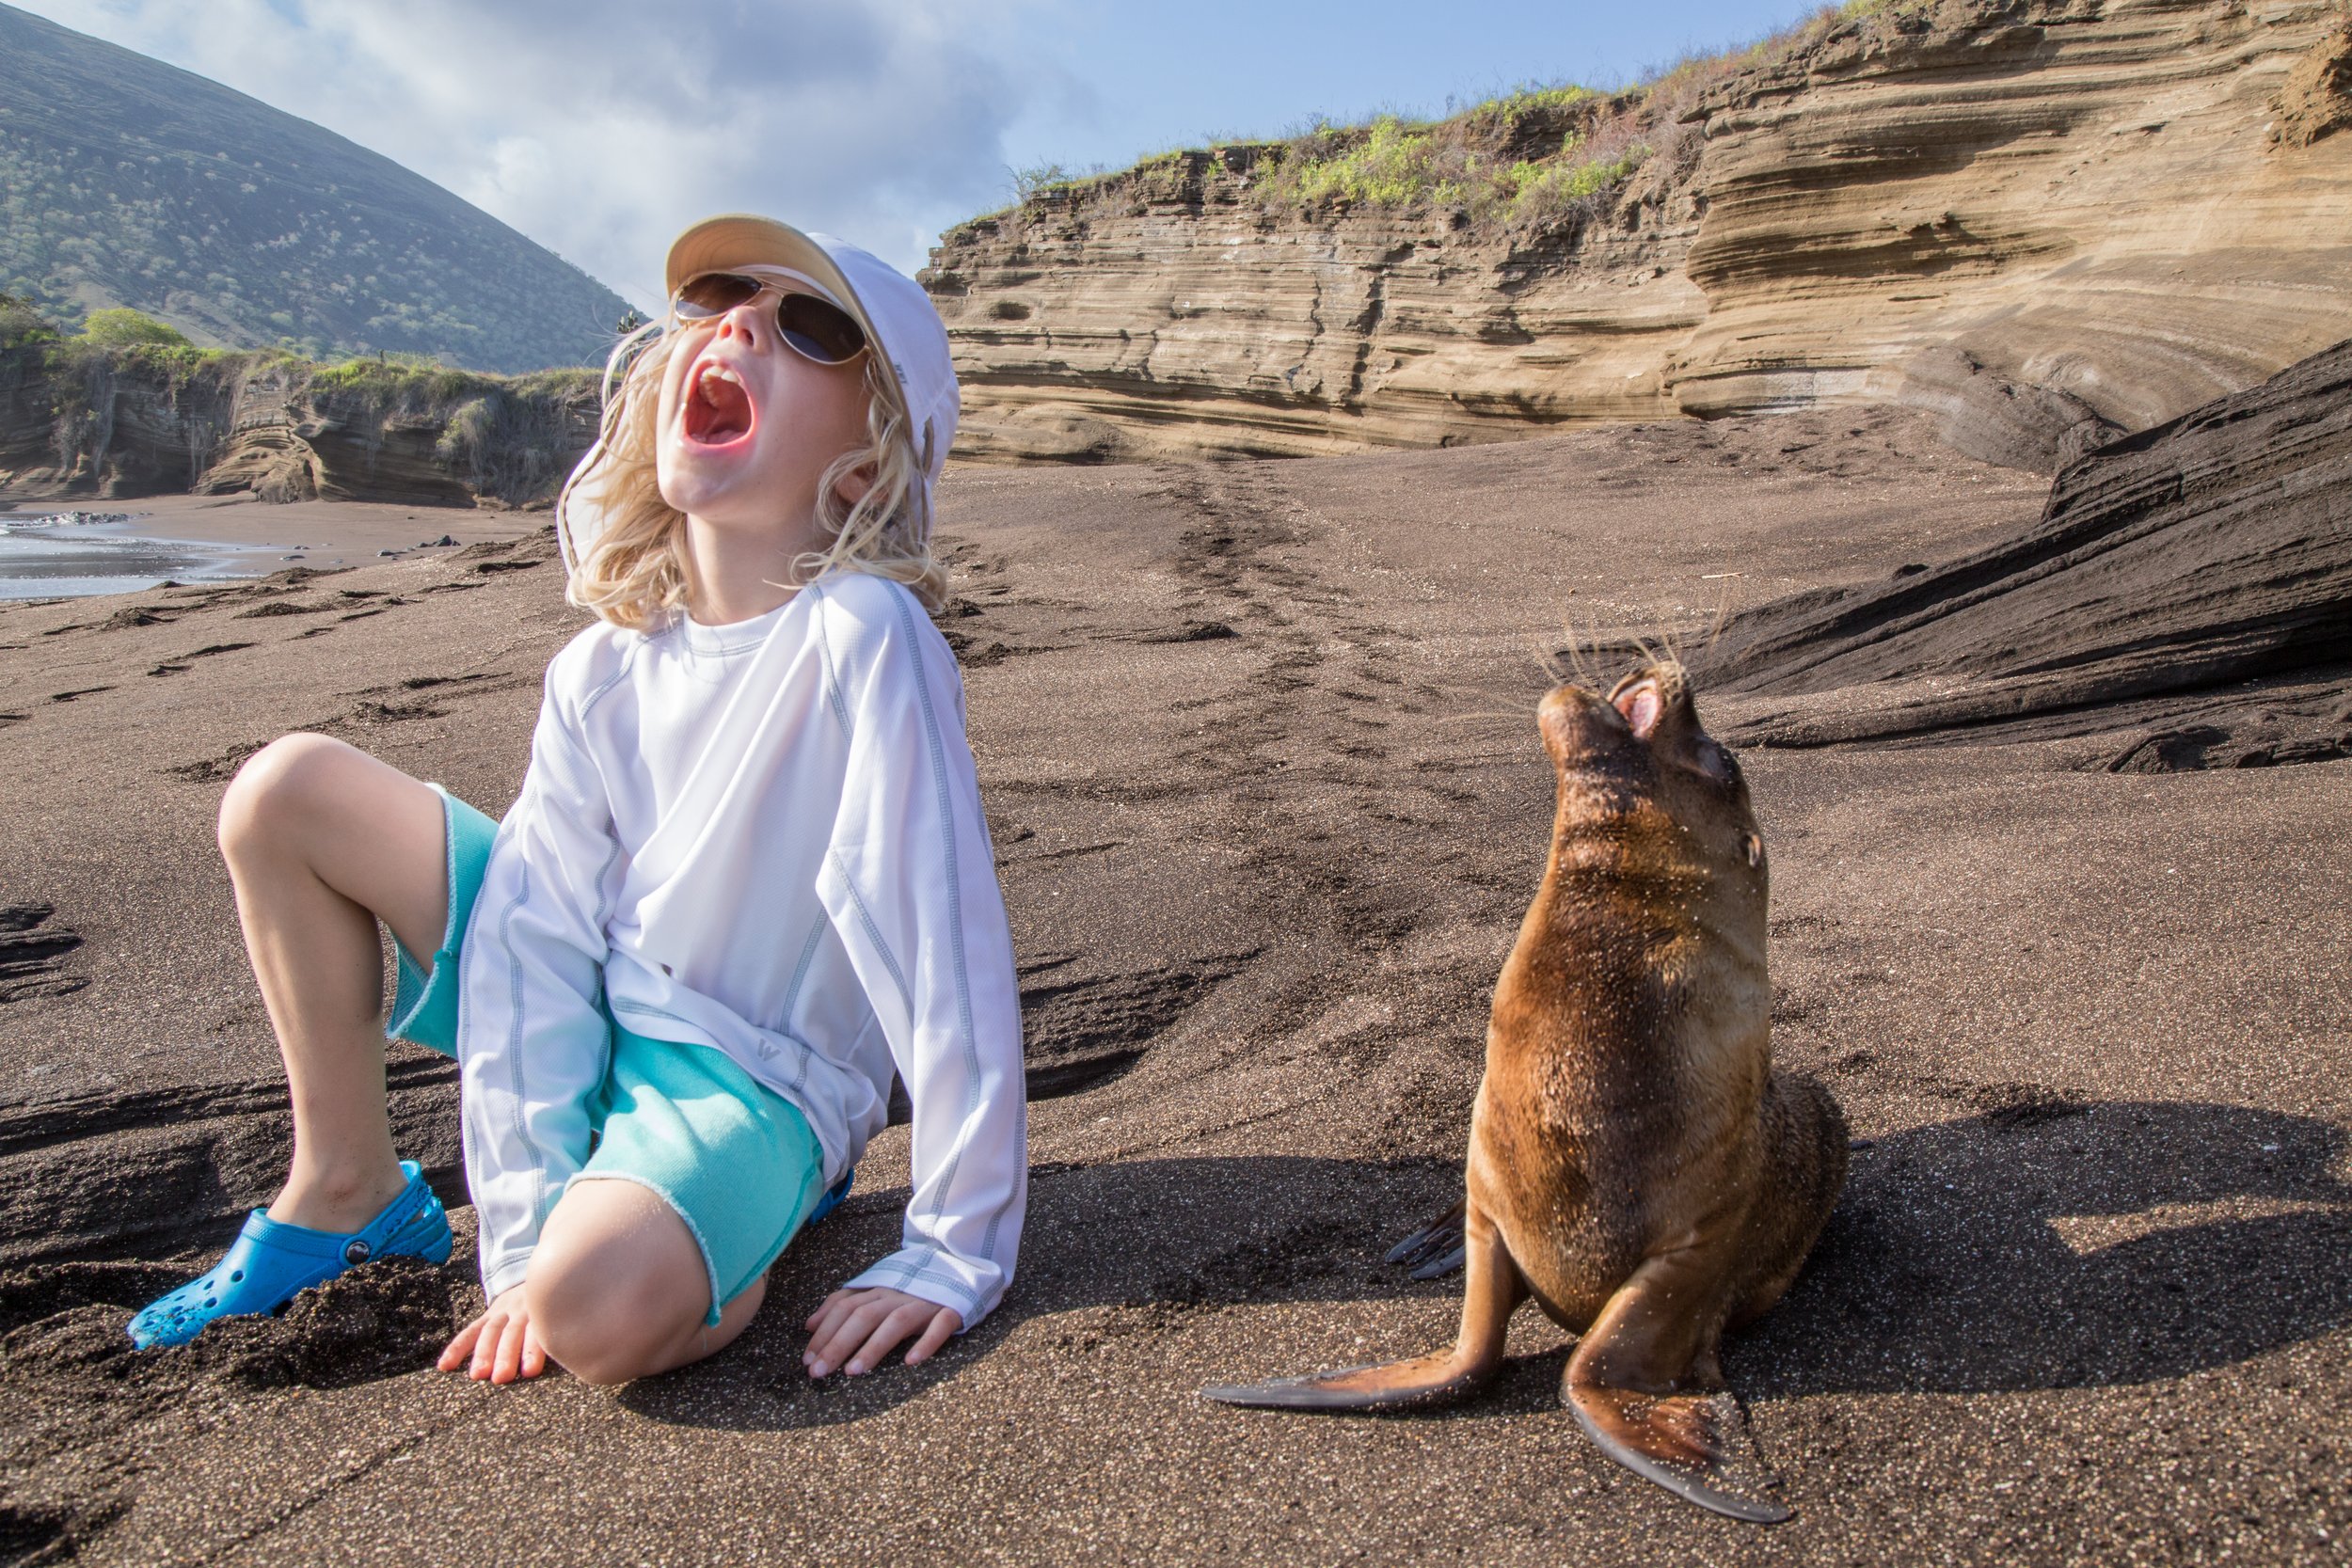   Galapagos Islands, 2014 -  The sea lions were so playful and endearing, and had a similar spirit to that of an eight year old boy.  